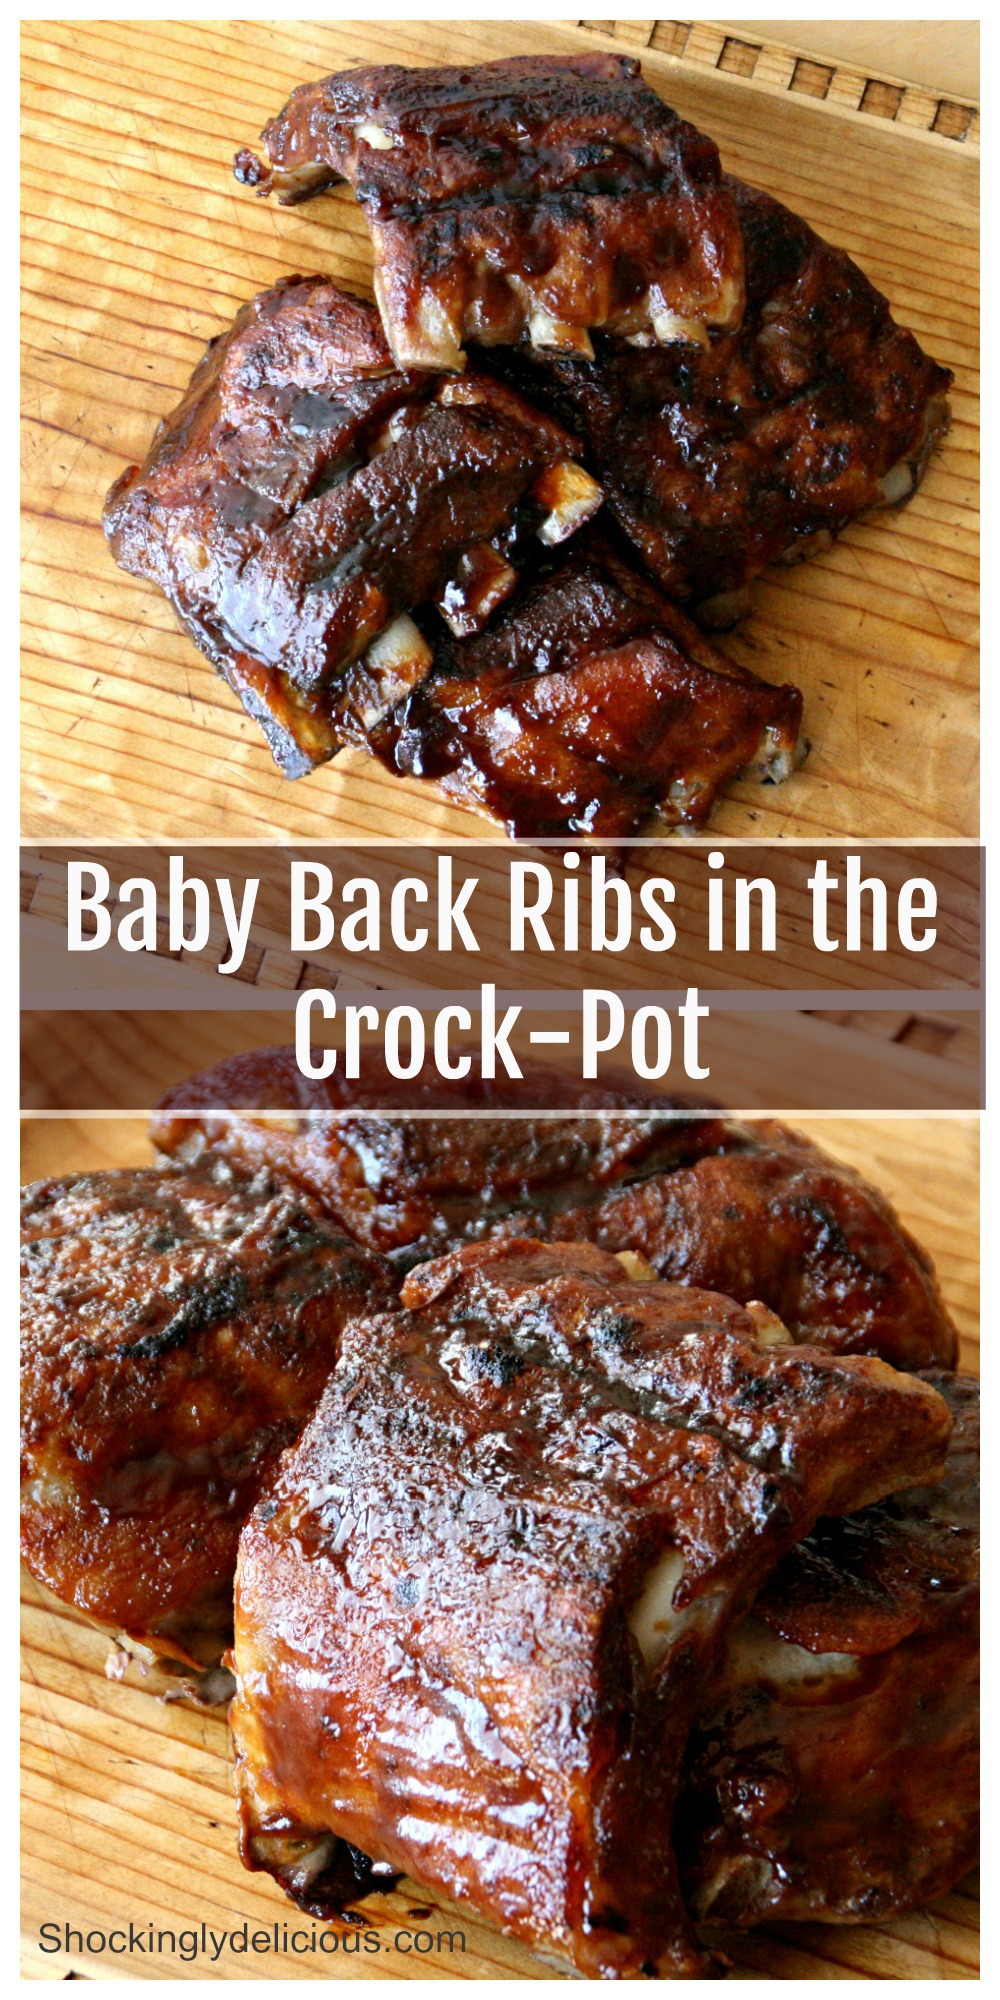 Baby Back Ribs in the Crock-Pot Easy Method